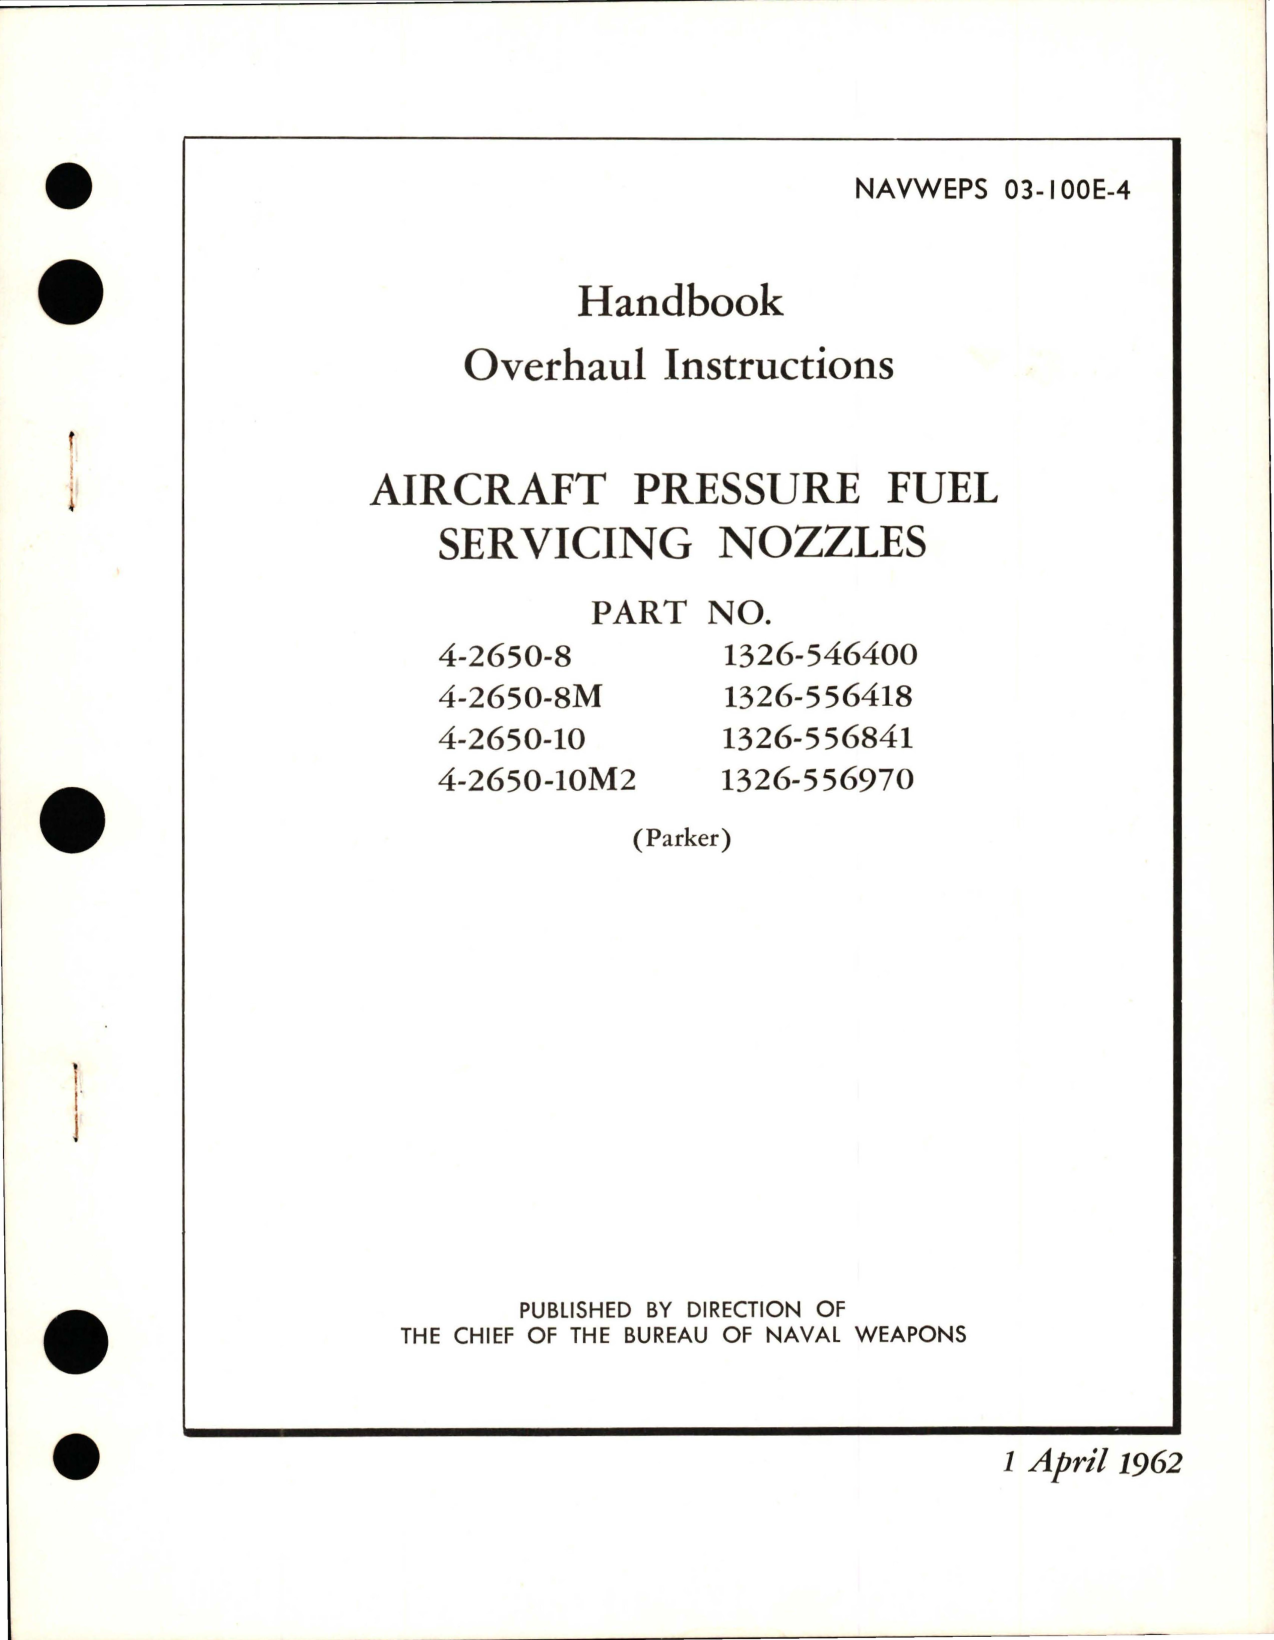 Sample page 1 from AirCorps Library document: Overhaul Instructions for Pressure Fuel Servicing Nozzles 